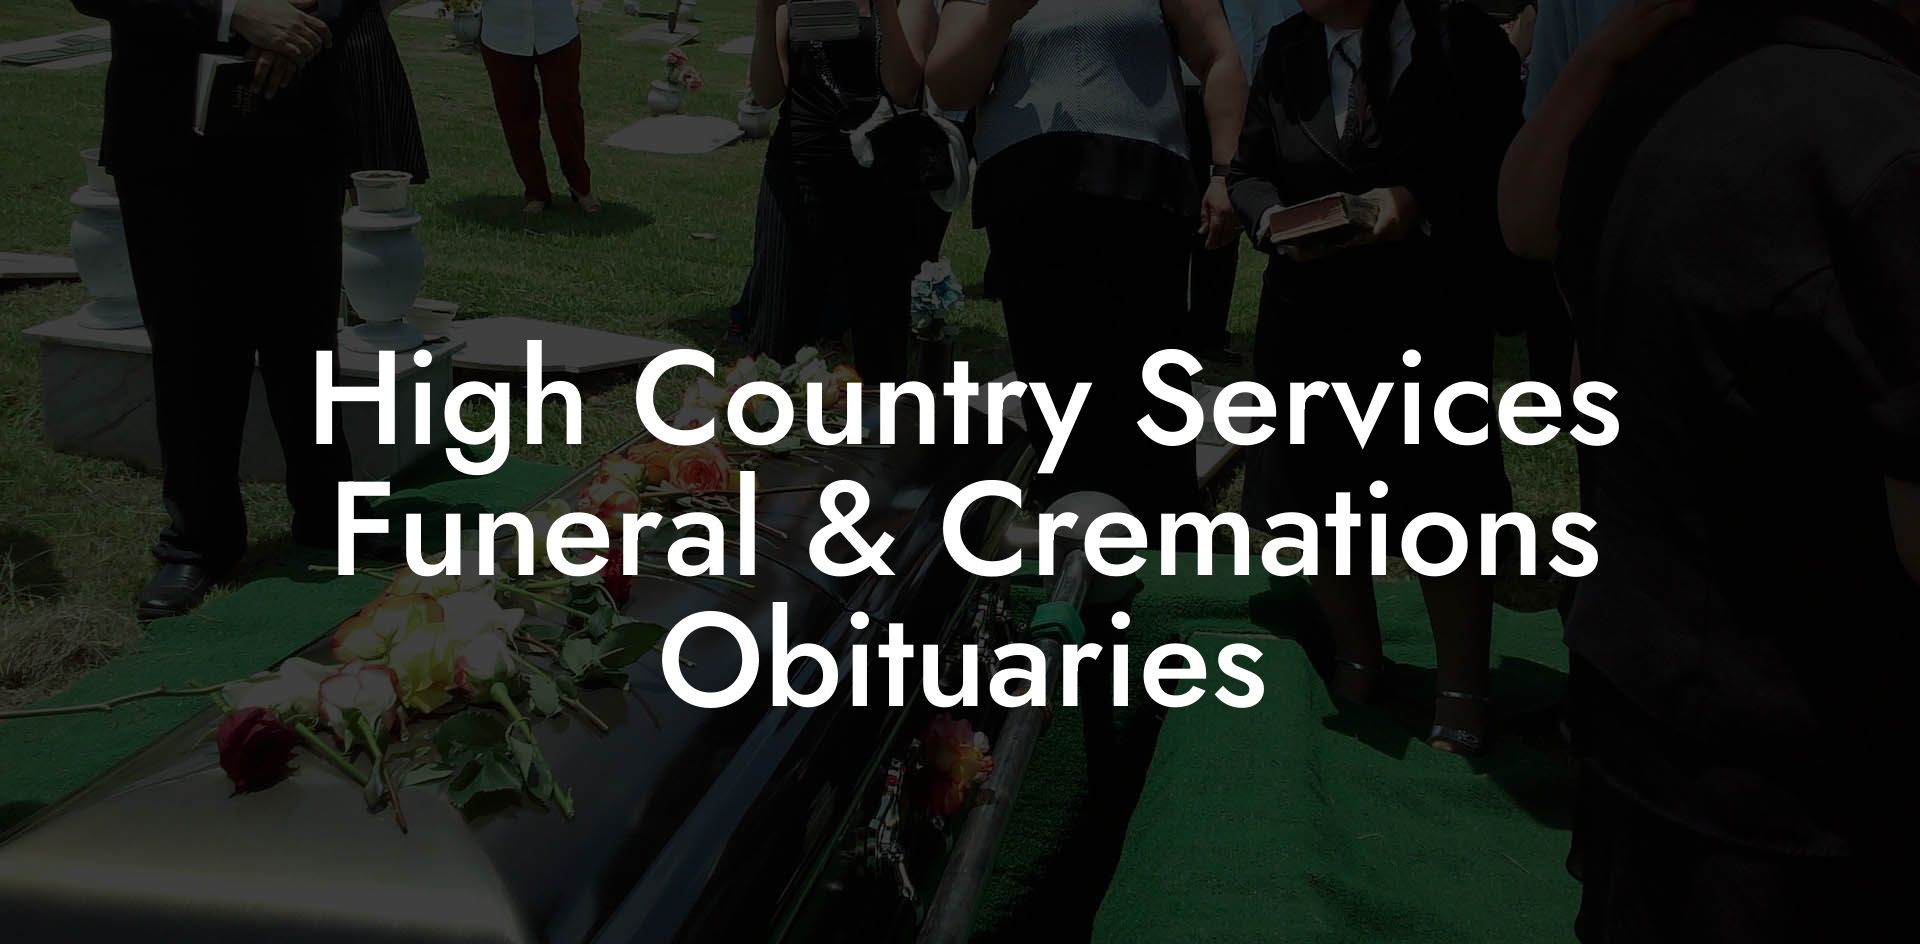 High Country Services Funeral & Cremations Obituaries